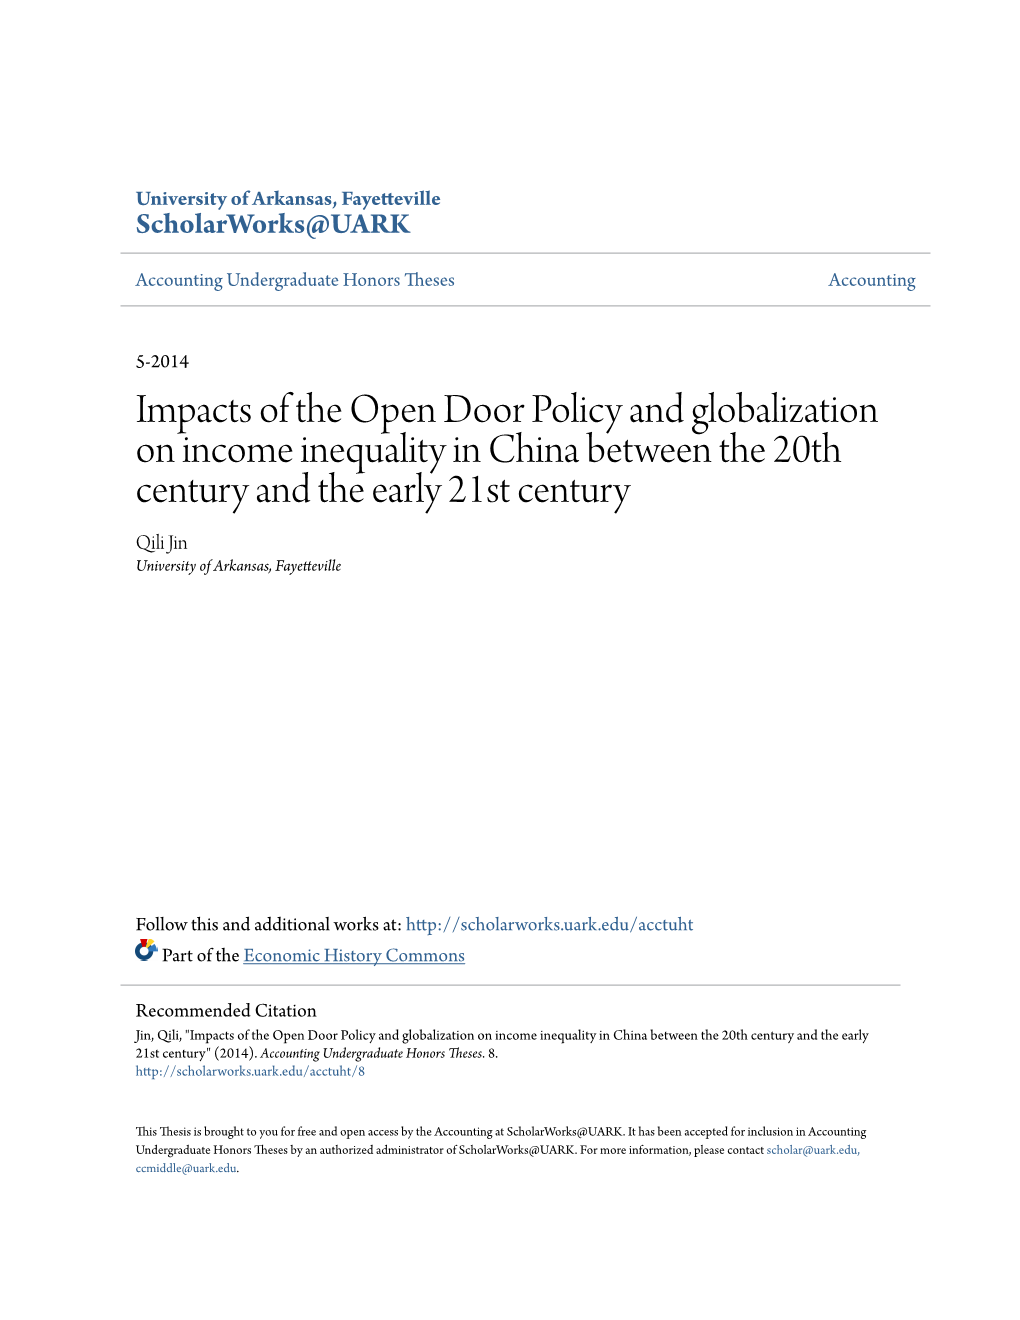 Impacts of the Open Door Policy and Globalization on Income Inequality